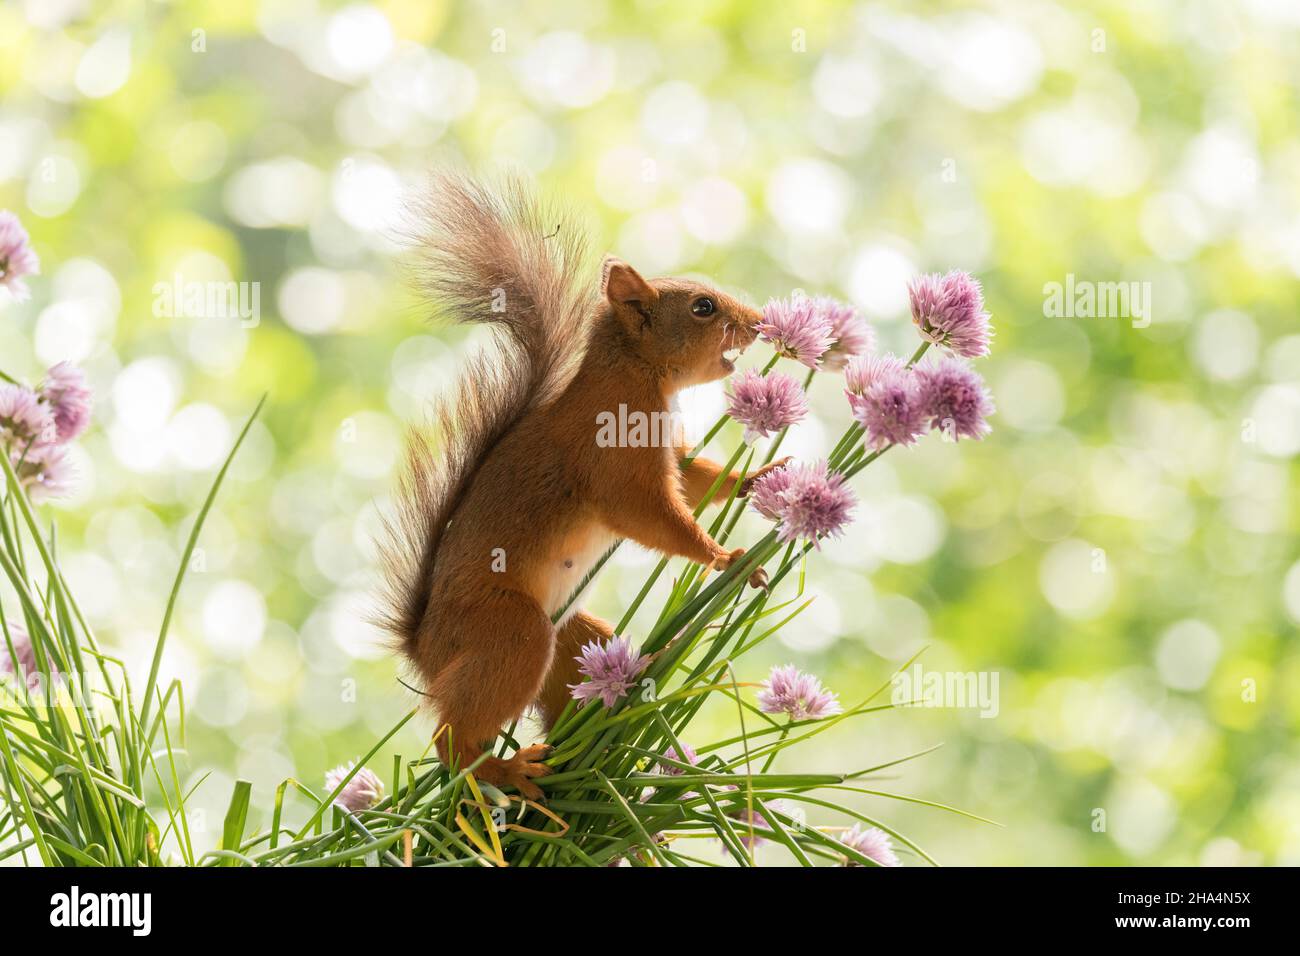 red squirrel hold chives flowers with open mouth Stock Photo